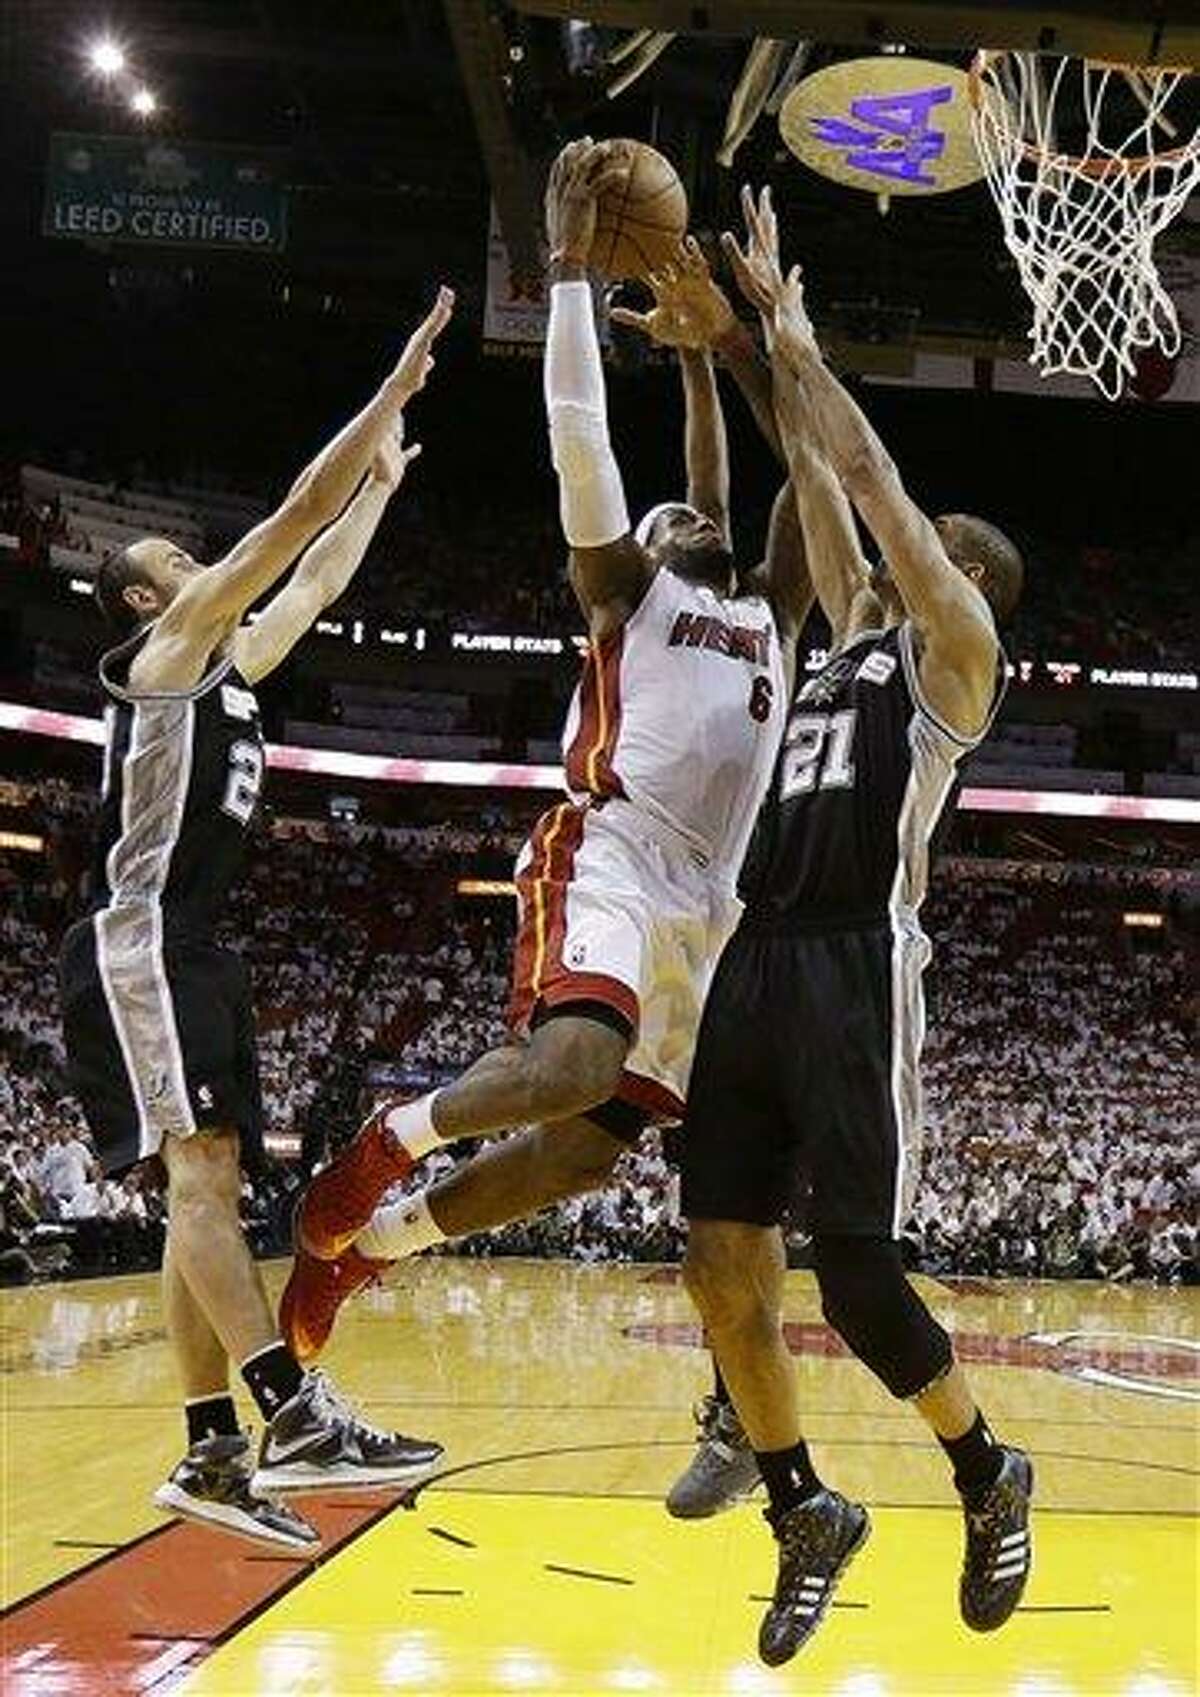 Miami Heat forward LeBron James (6) drives to the basket as San Antonio Spurs power forward Tim Duncan (21) and guard Manu Ginobili (20) of Argentina defend during the first half of Game 6 of the NBA Finals basketball game against the San Antonio Spurs, Tuesday, June 18, 2013 in Miami. The Heat defeated the Spurs 103-100 in overtime. (AP Photo/Lynne Sladky)